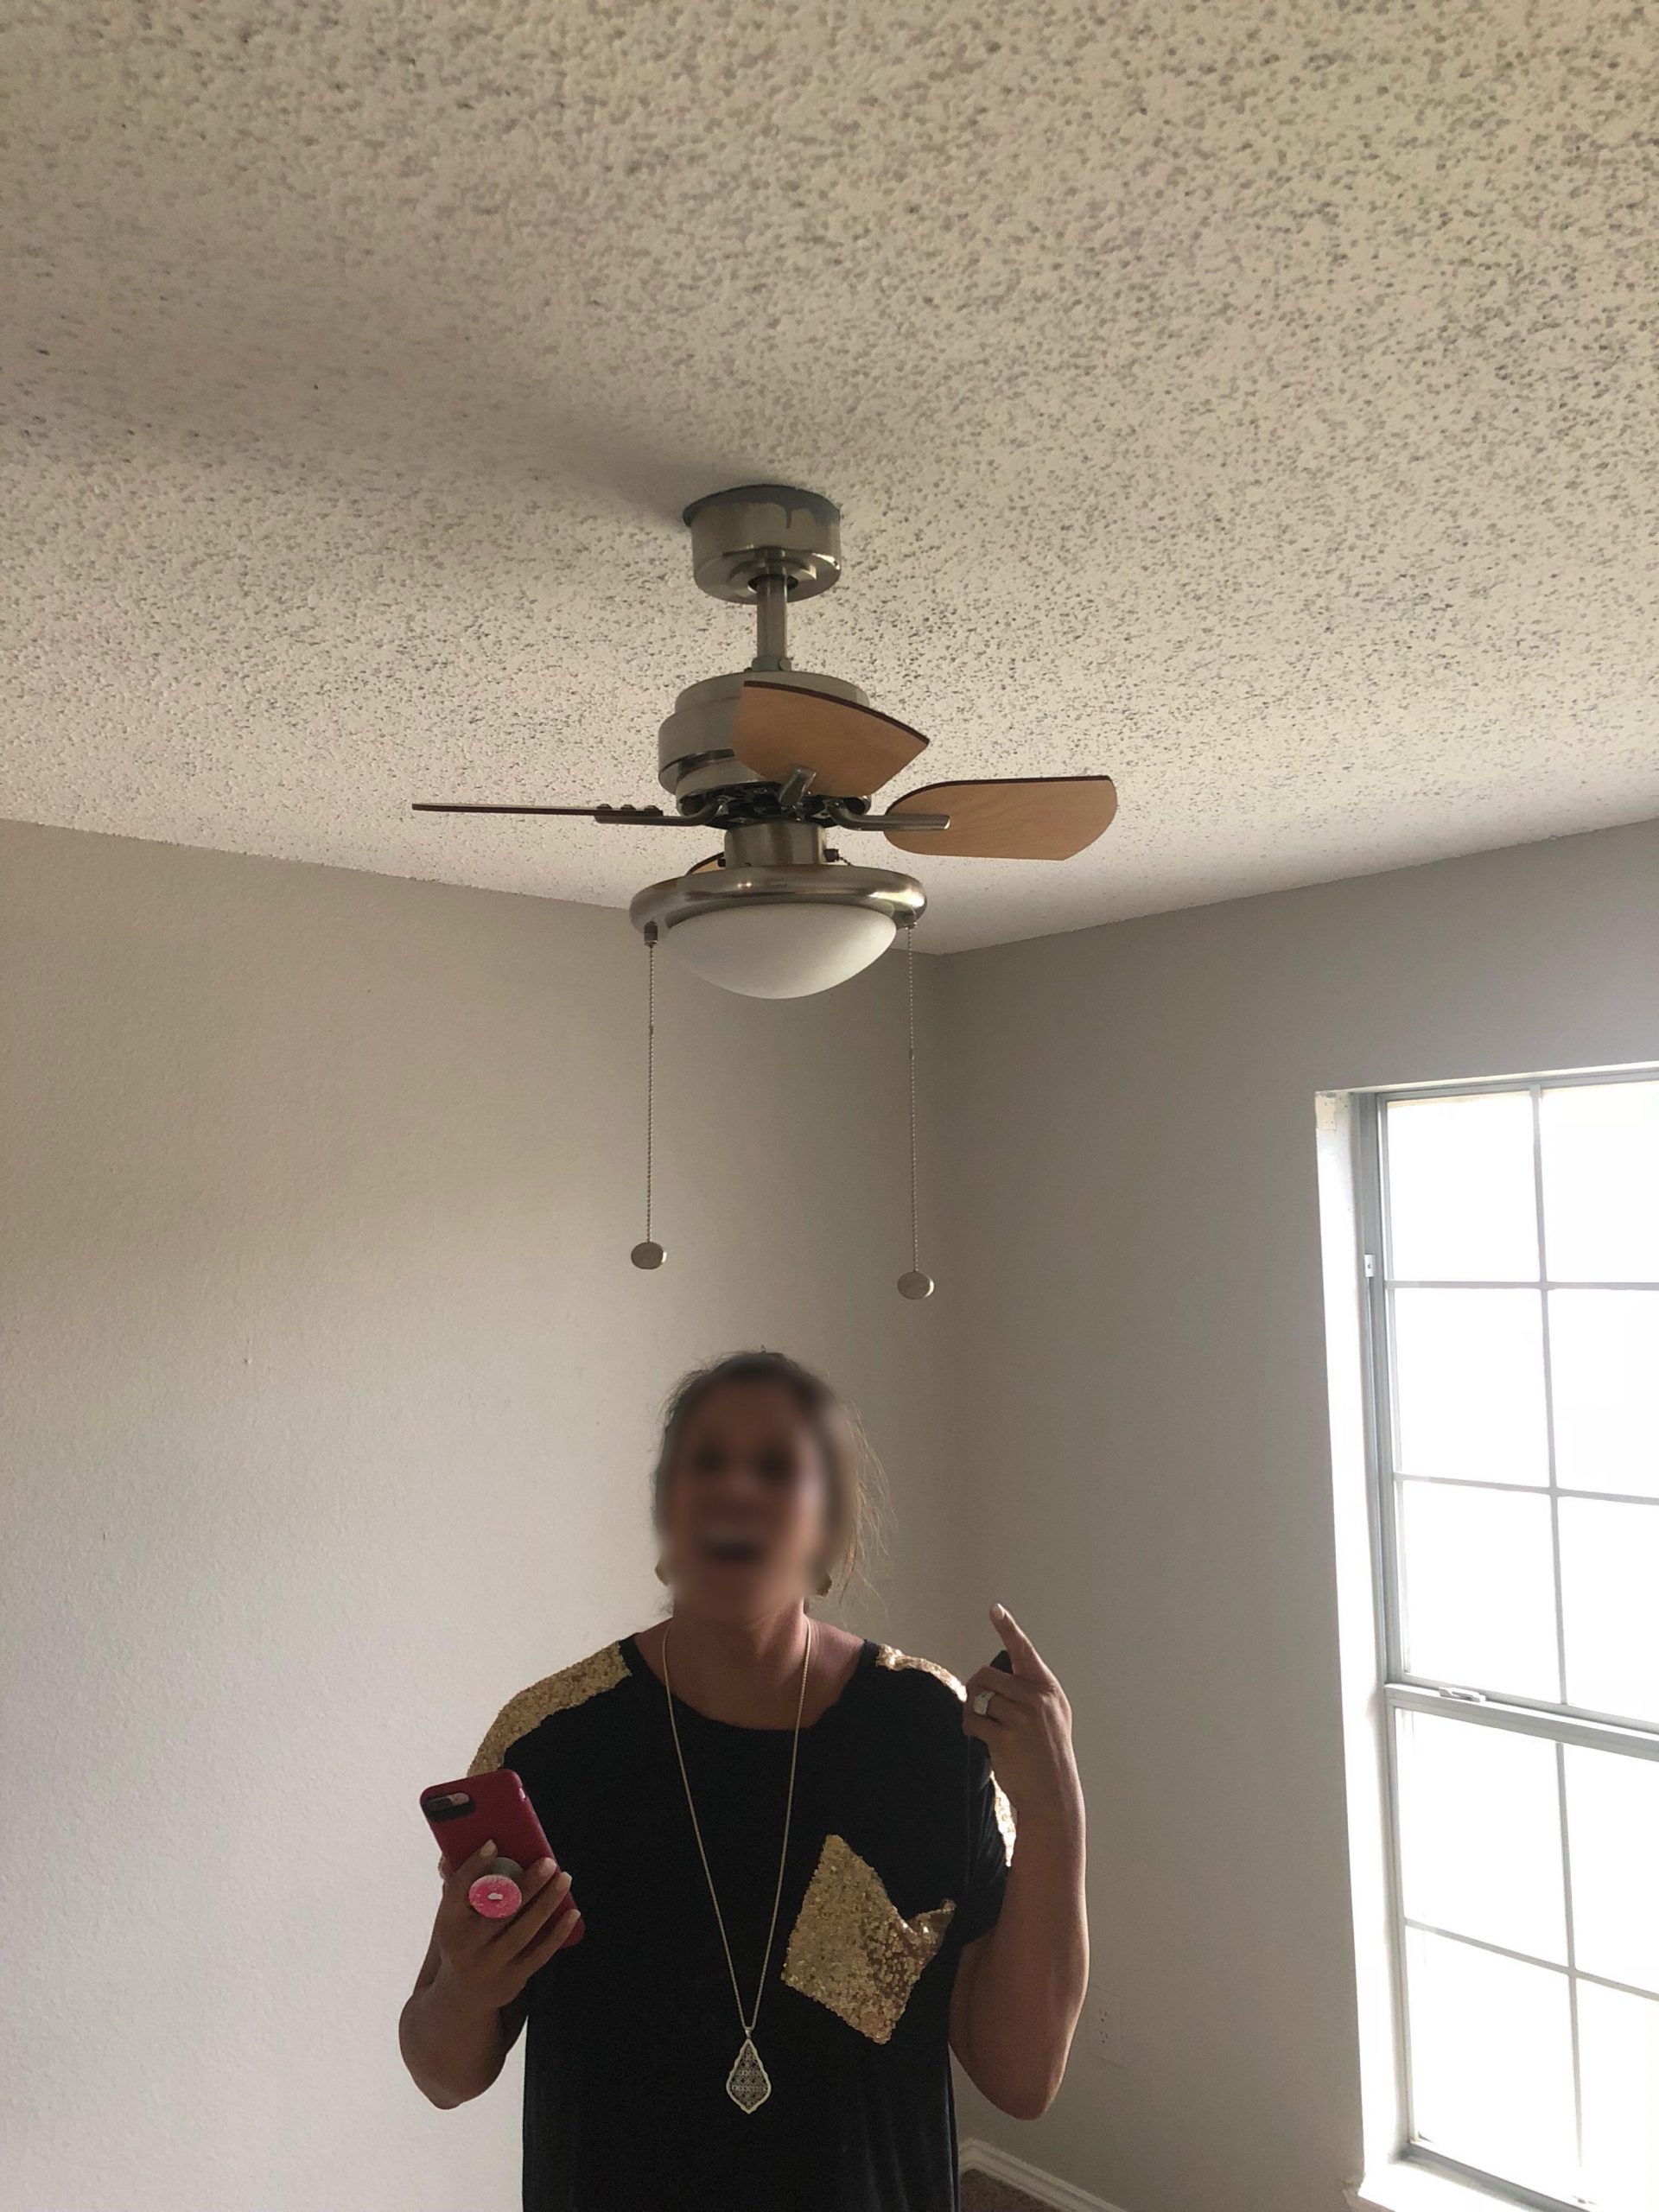 Whats This A Ceiling Fan For Ants Crappydesign in size 3024 X 4032